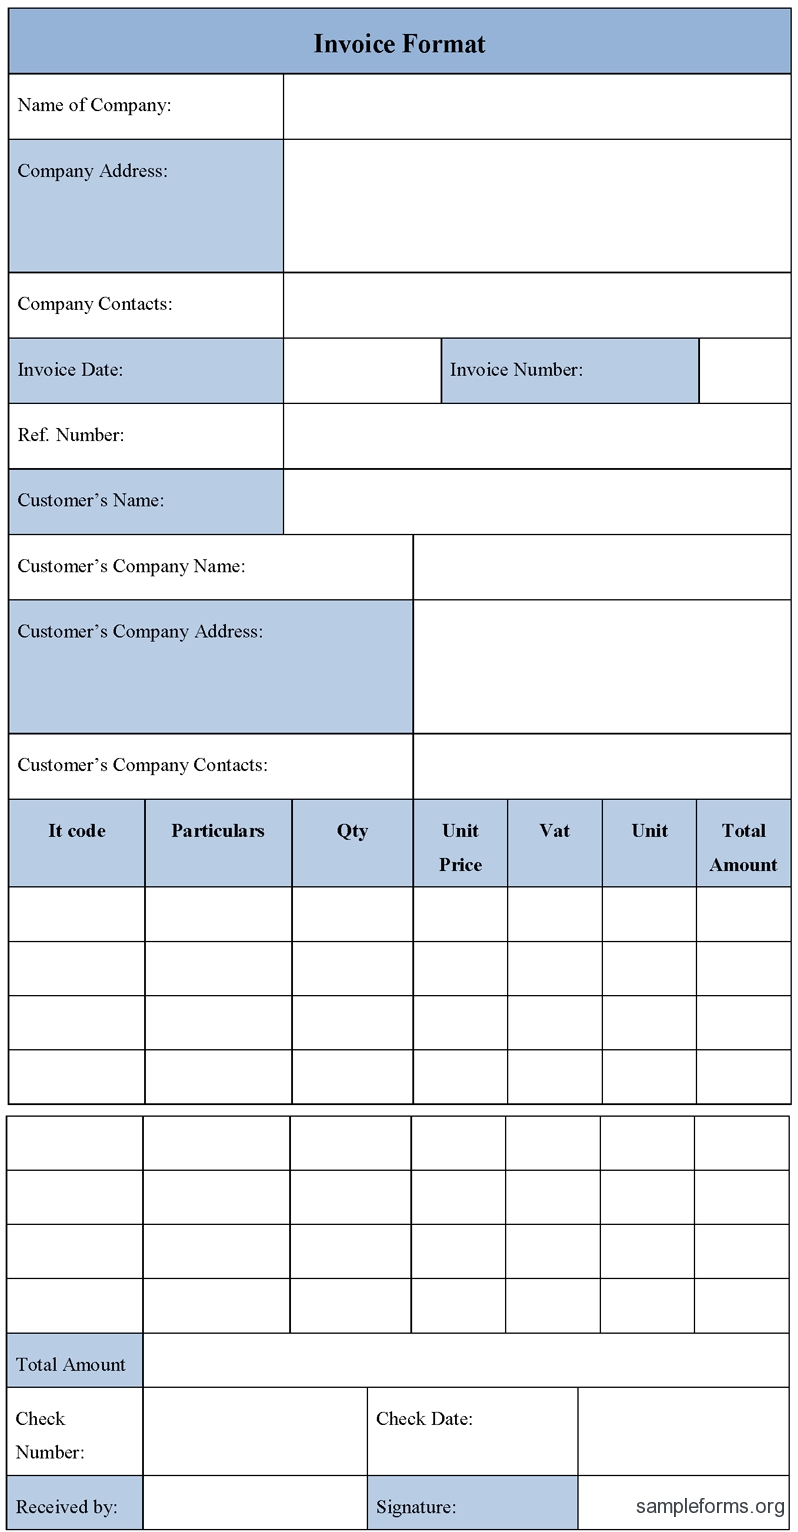 create your own invoices excel based consulting invoice template make your own invoices